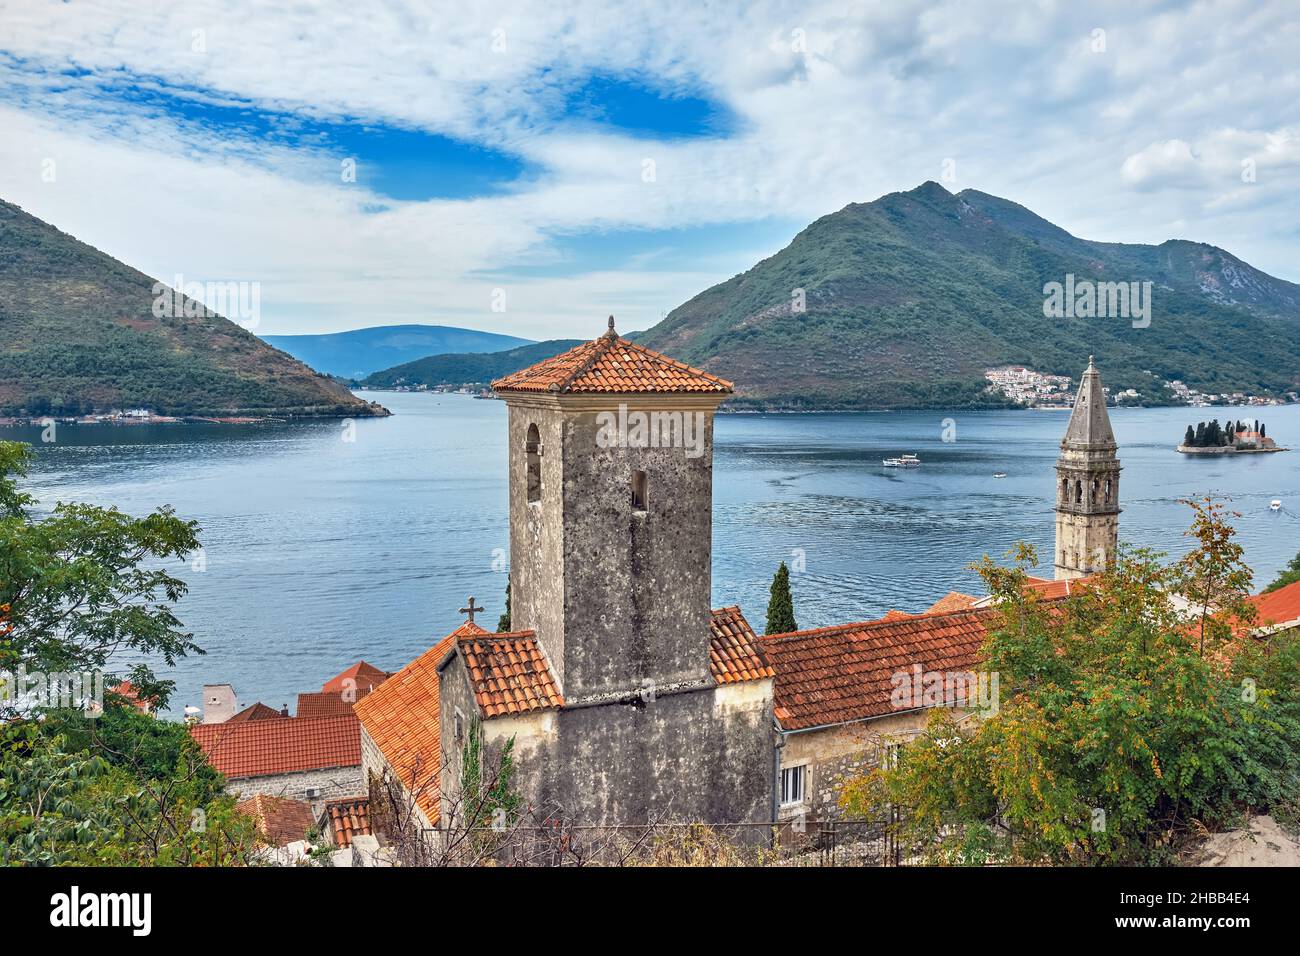 View of Church of St. Matthew is located in Dobrota, small town located on the coast between Kotor and Perast, Boka Kotorska Bay, Montenegro. Stock Photo